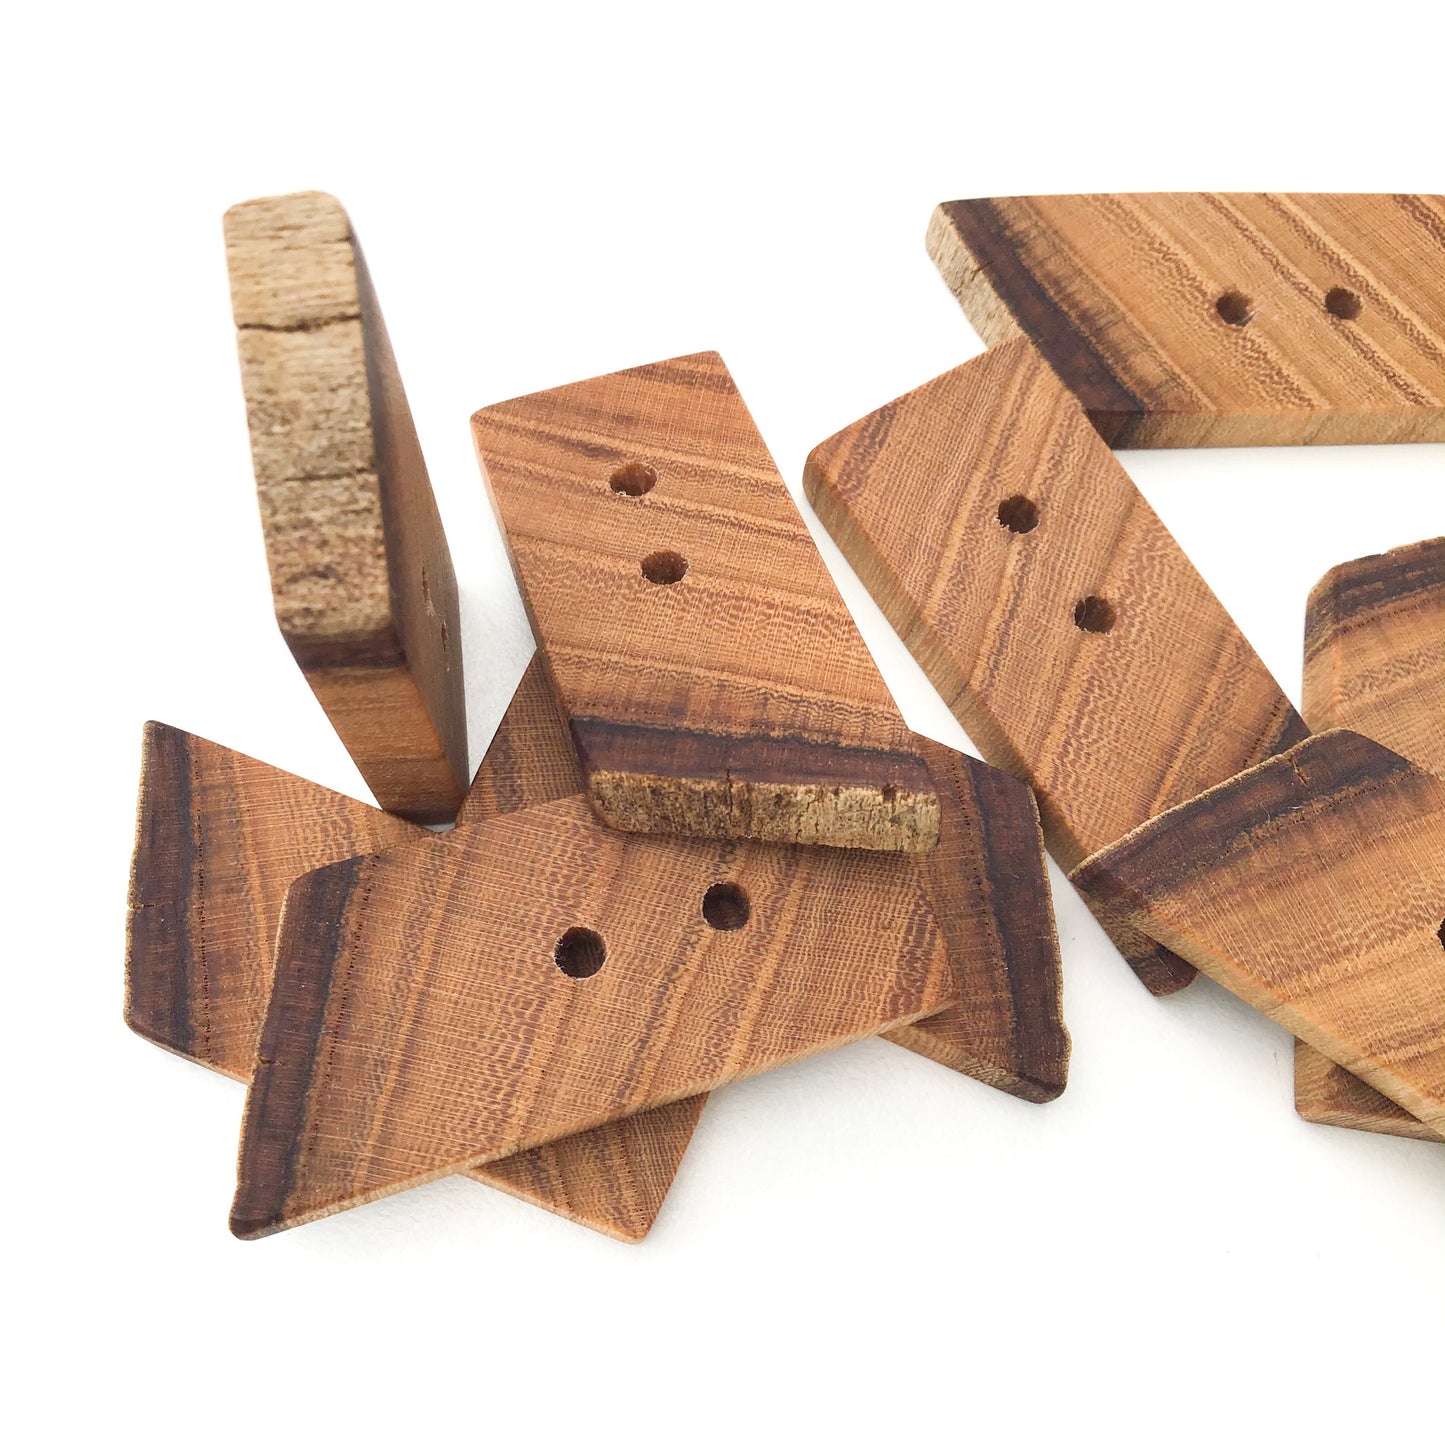 Rustic American Elm Wood Buttons - Live Edge American Elm Buttons - 3/4" x 1 1 5/8"